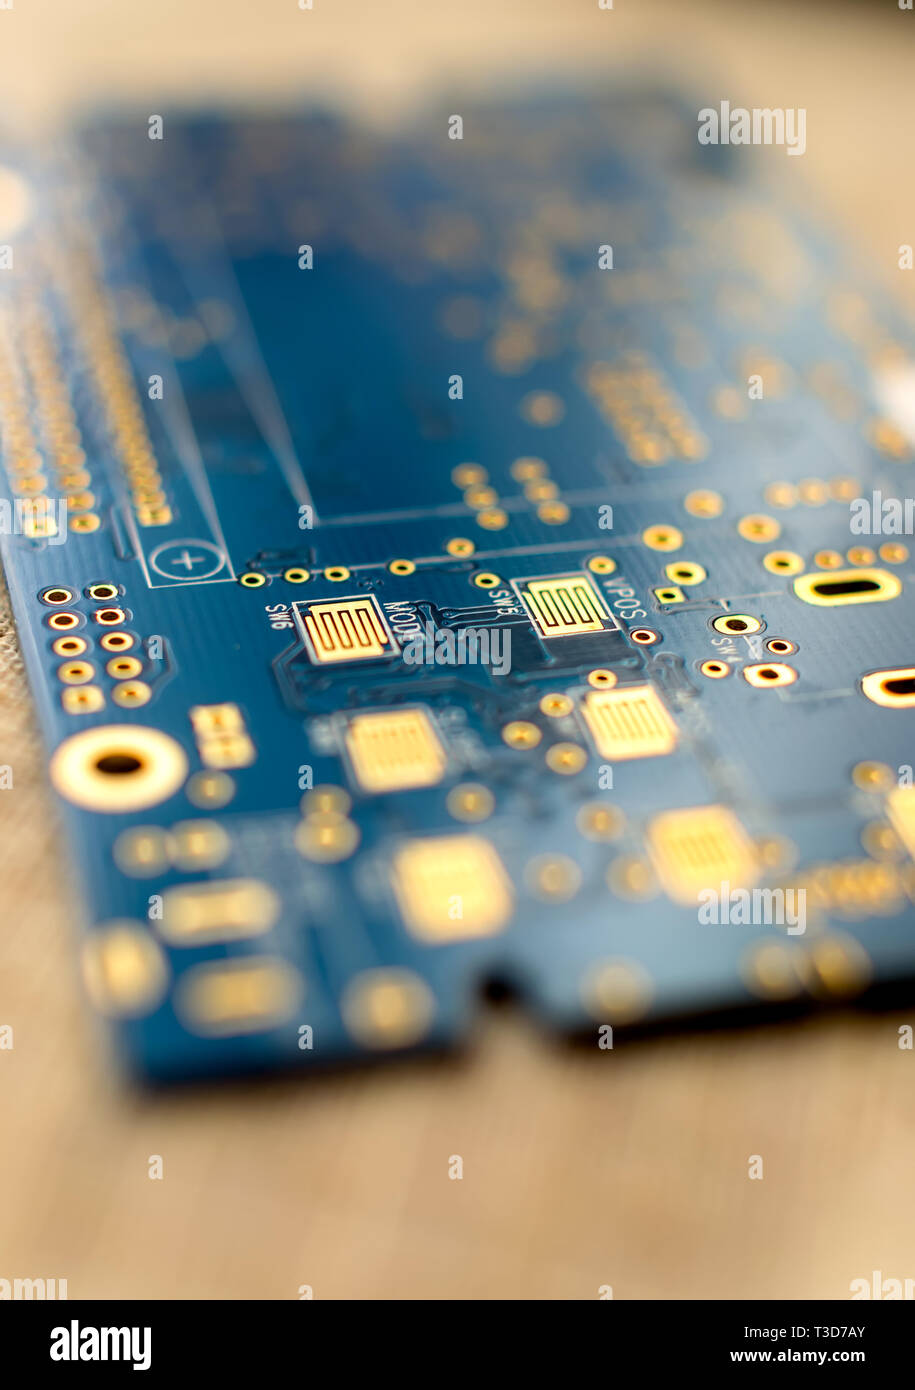 Circuitboard with resistors microchips and smd electronic components - selective focus Stock Photo